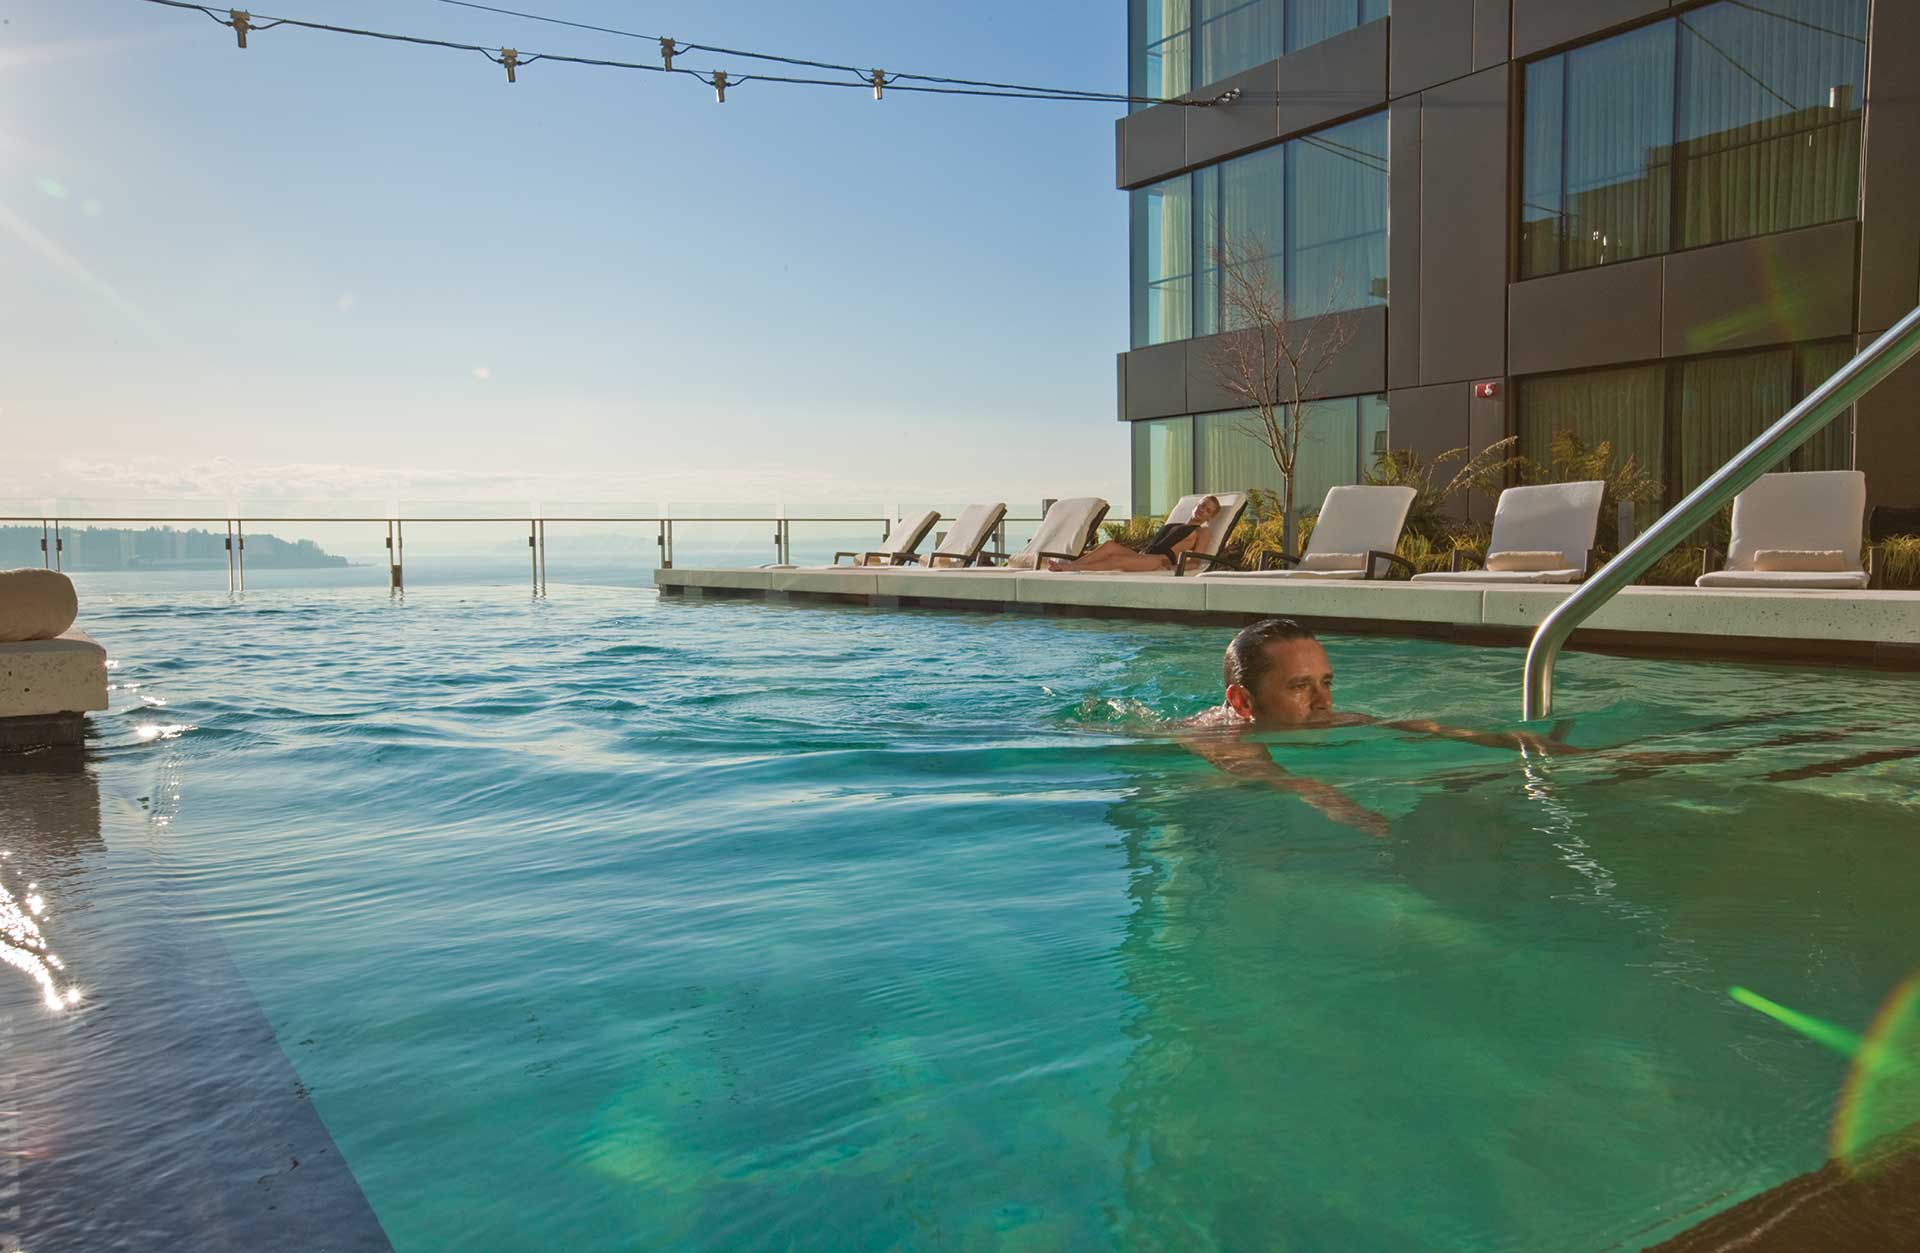 Four Seasons Hotel and Residences Seattle pool with swimmer